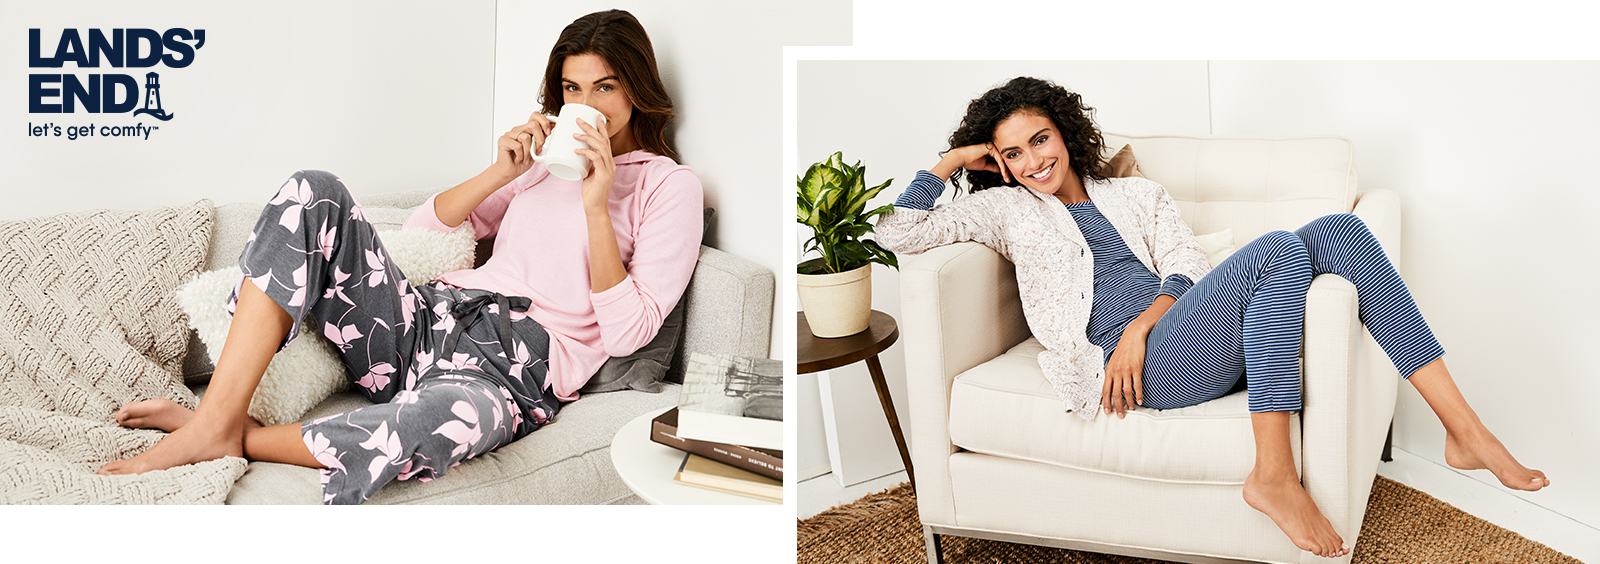 Why You Should Treat Yourself to Comfy Pajamas